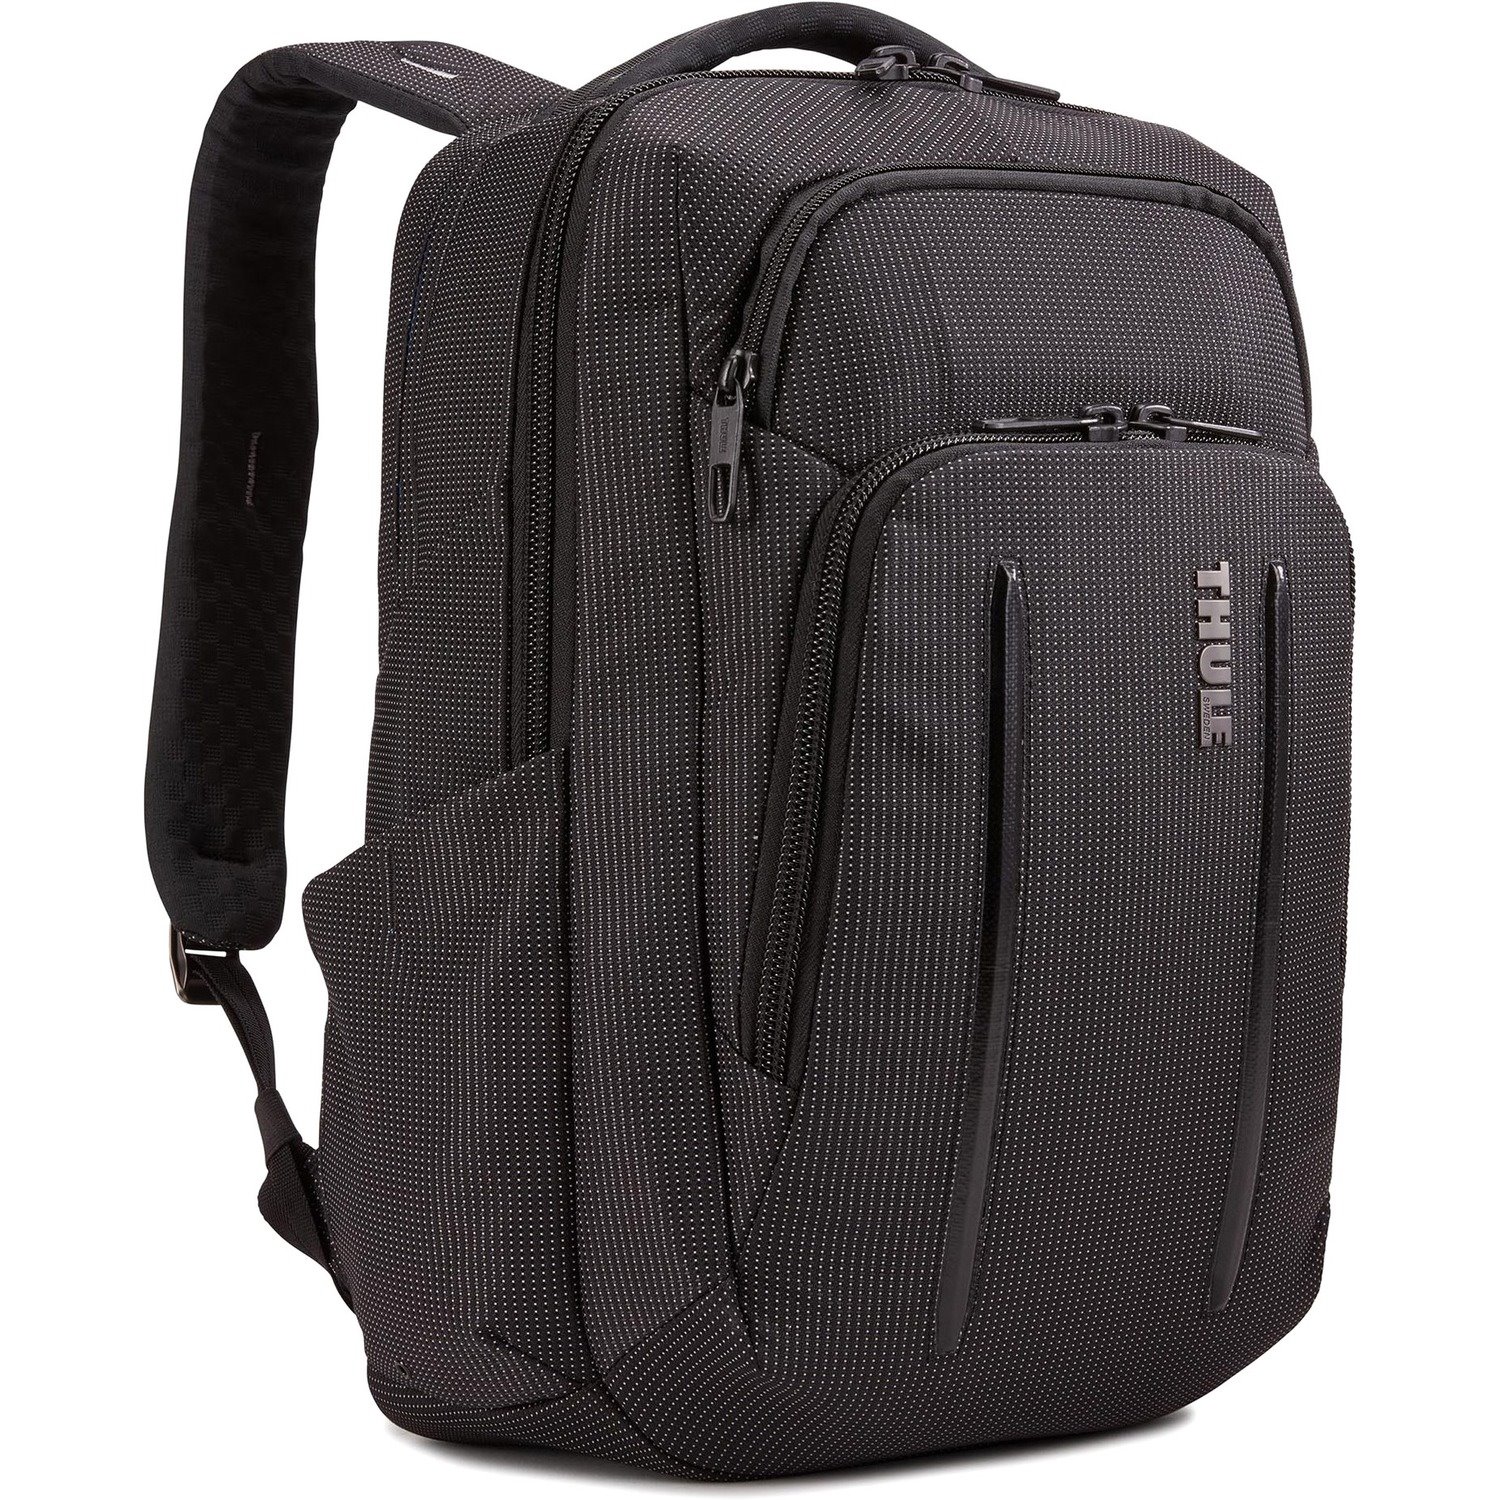 Thule Crossover 2 Carrying Case (Backpack) Accessories, Water Bottle, Notebook, Tablet PC - Black